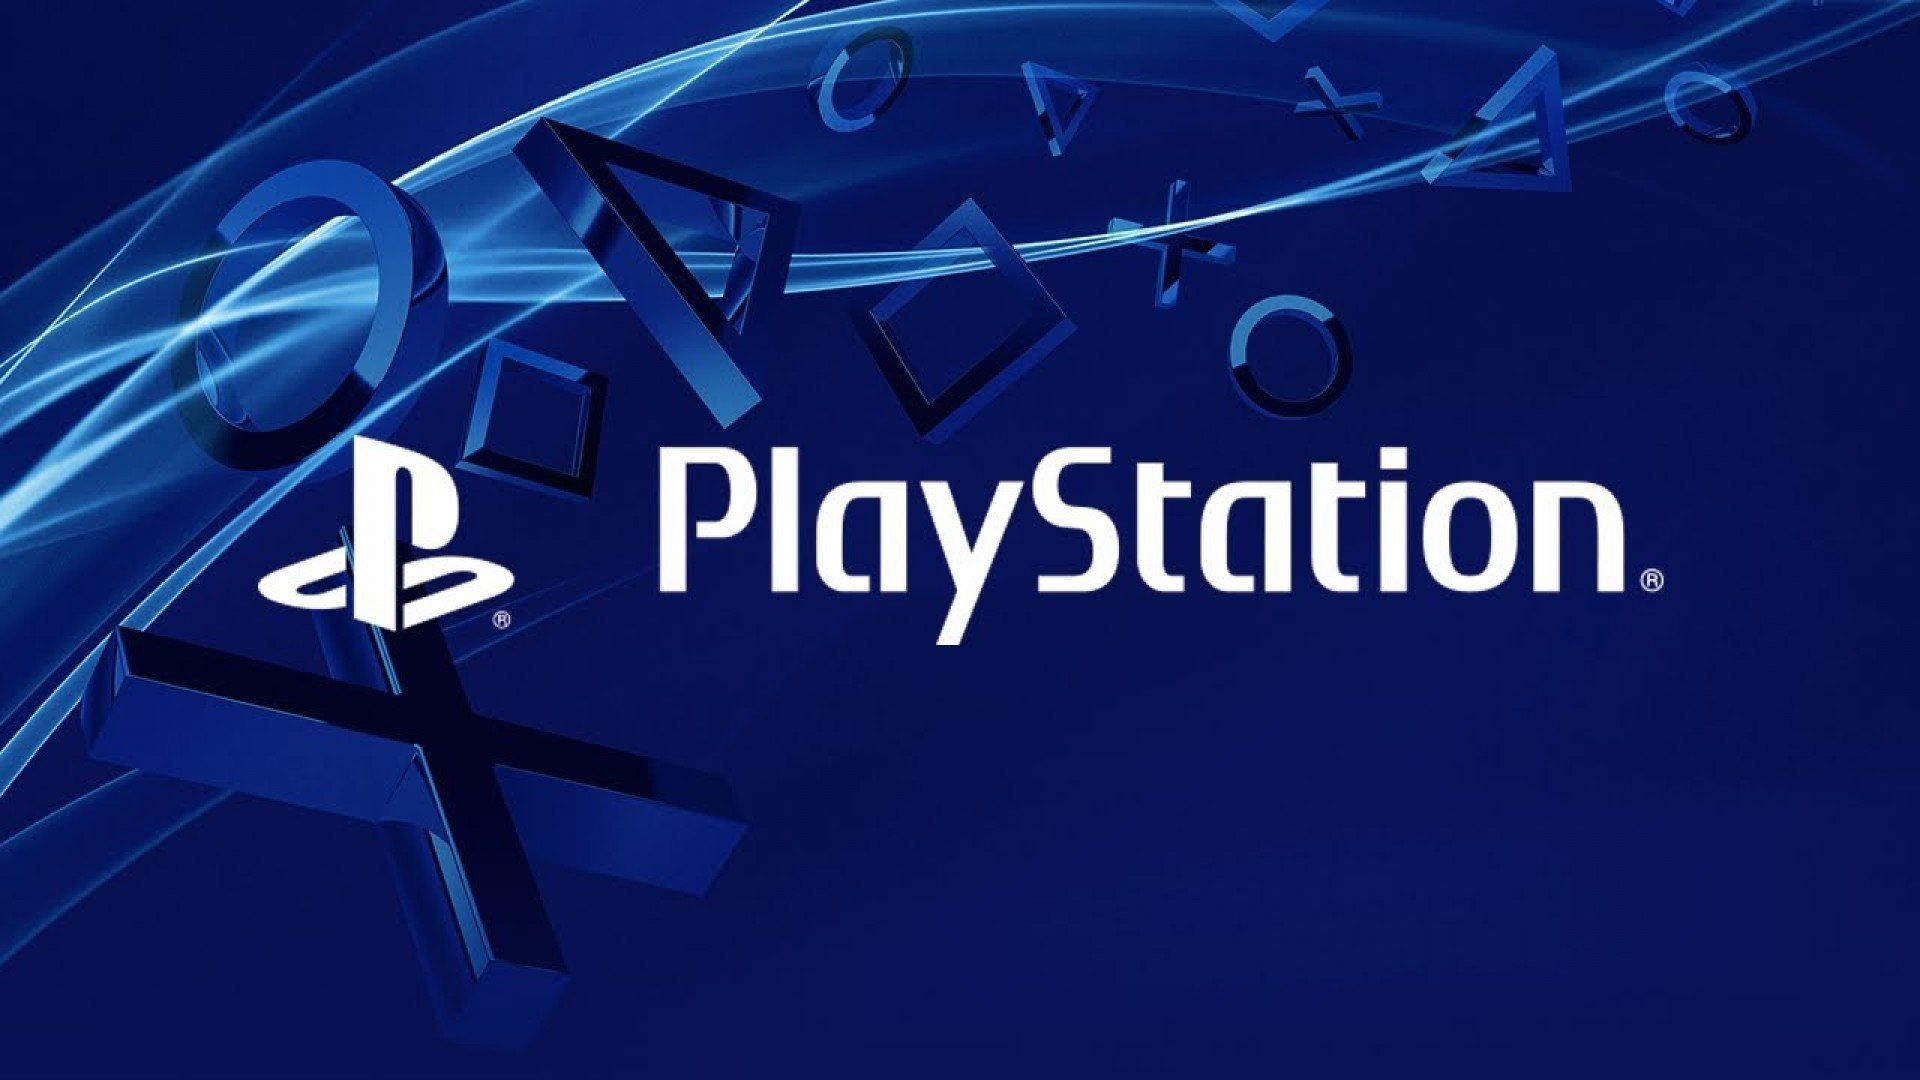 The PlayStation, Sony PlayStation wallpapers, Gaming aesthetics, Console graphics, 1920x1080 Full HD Desktop